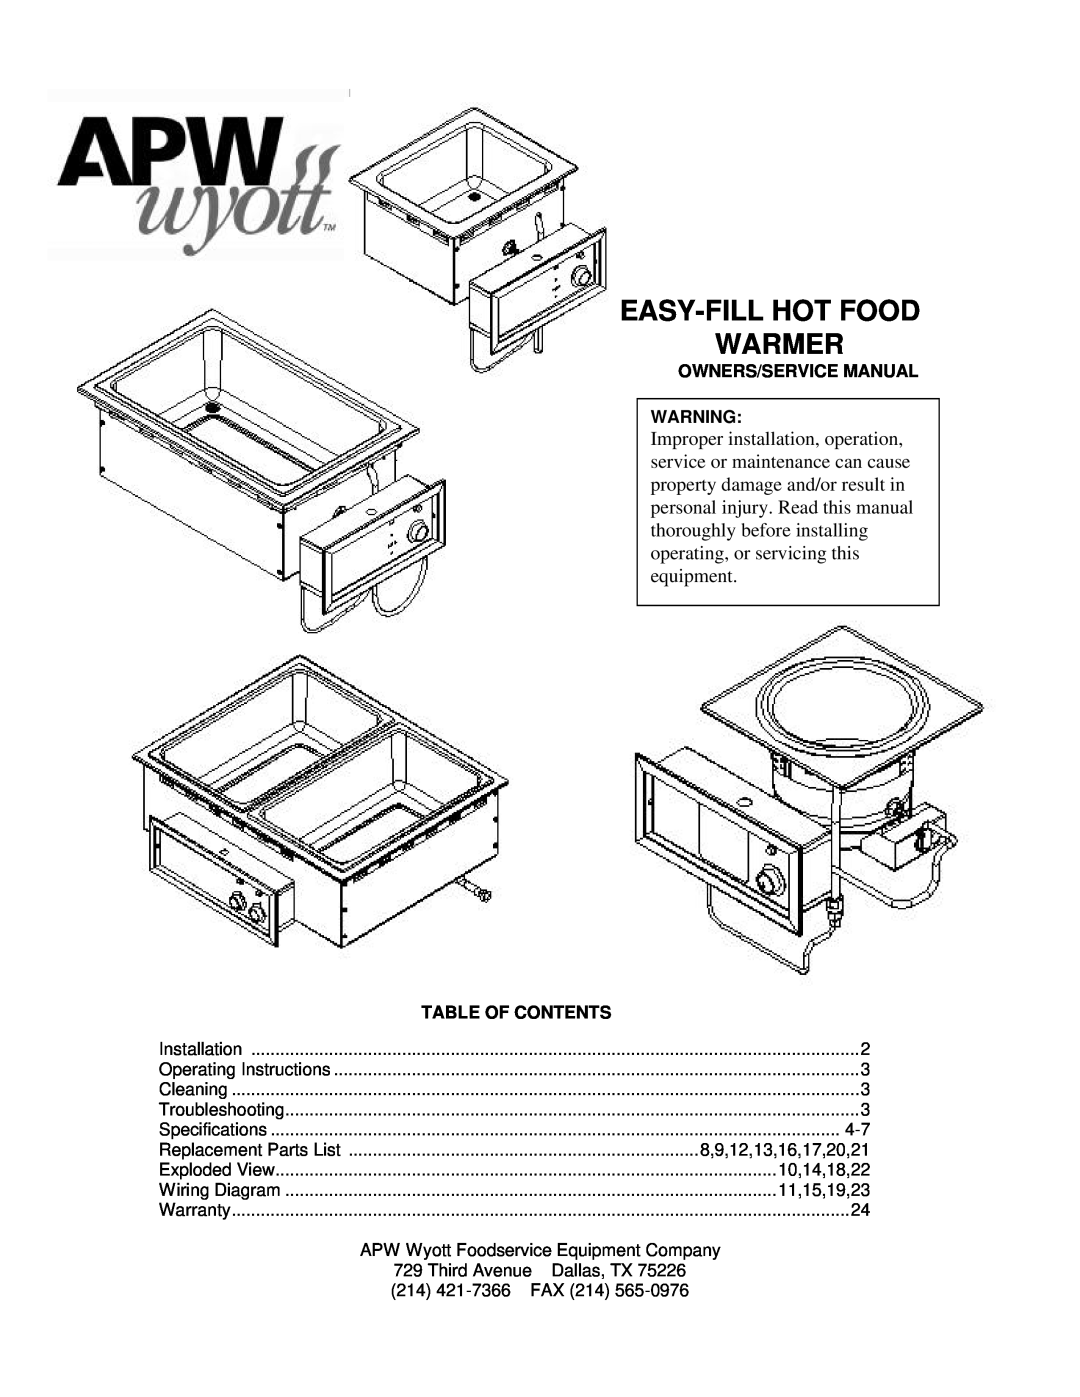 APW Wyott HOT FOOD WARMER service manual Easy-Fill Hot Food Warmer, Table Of Contents 